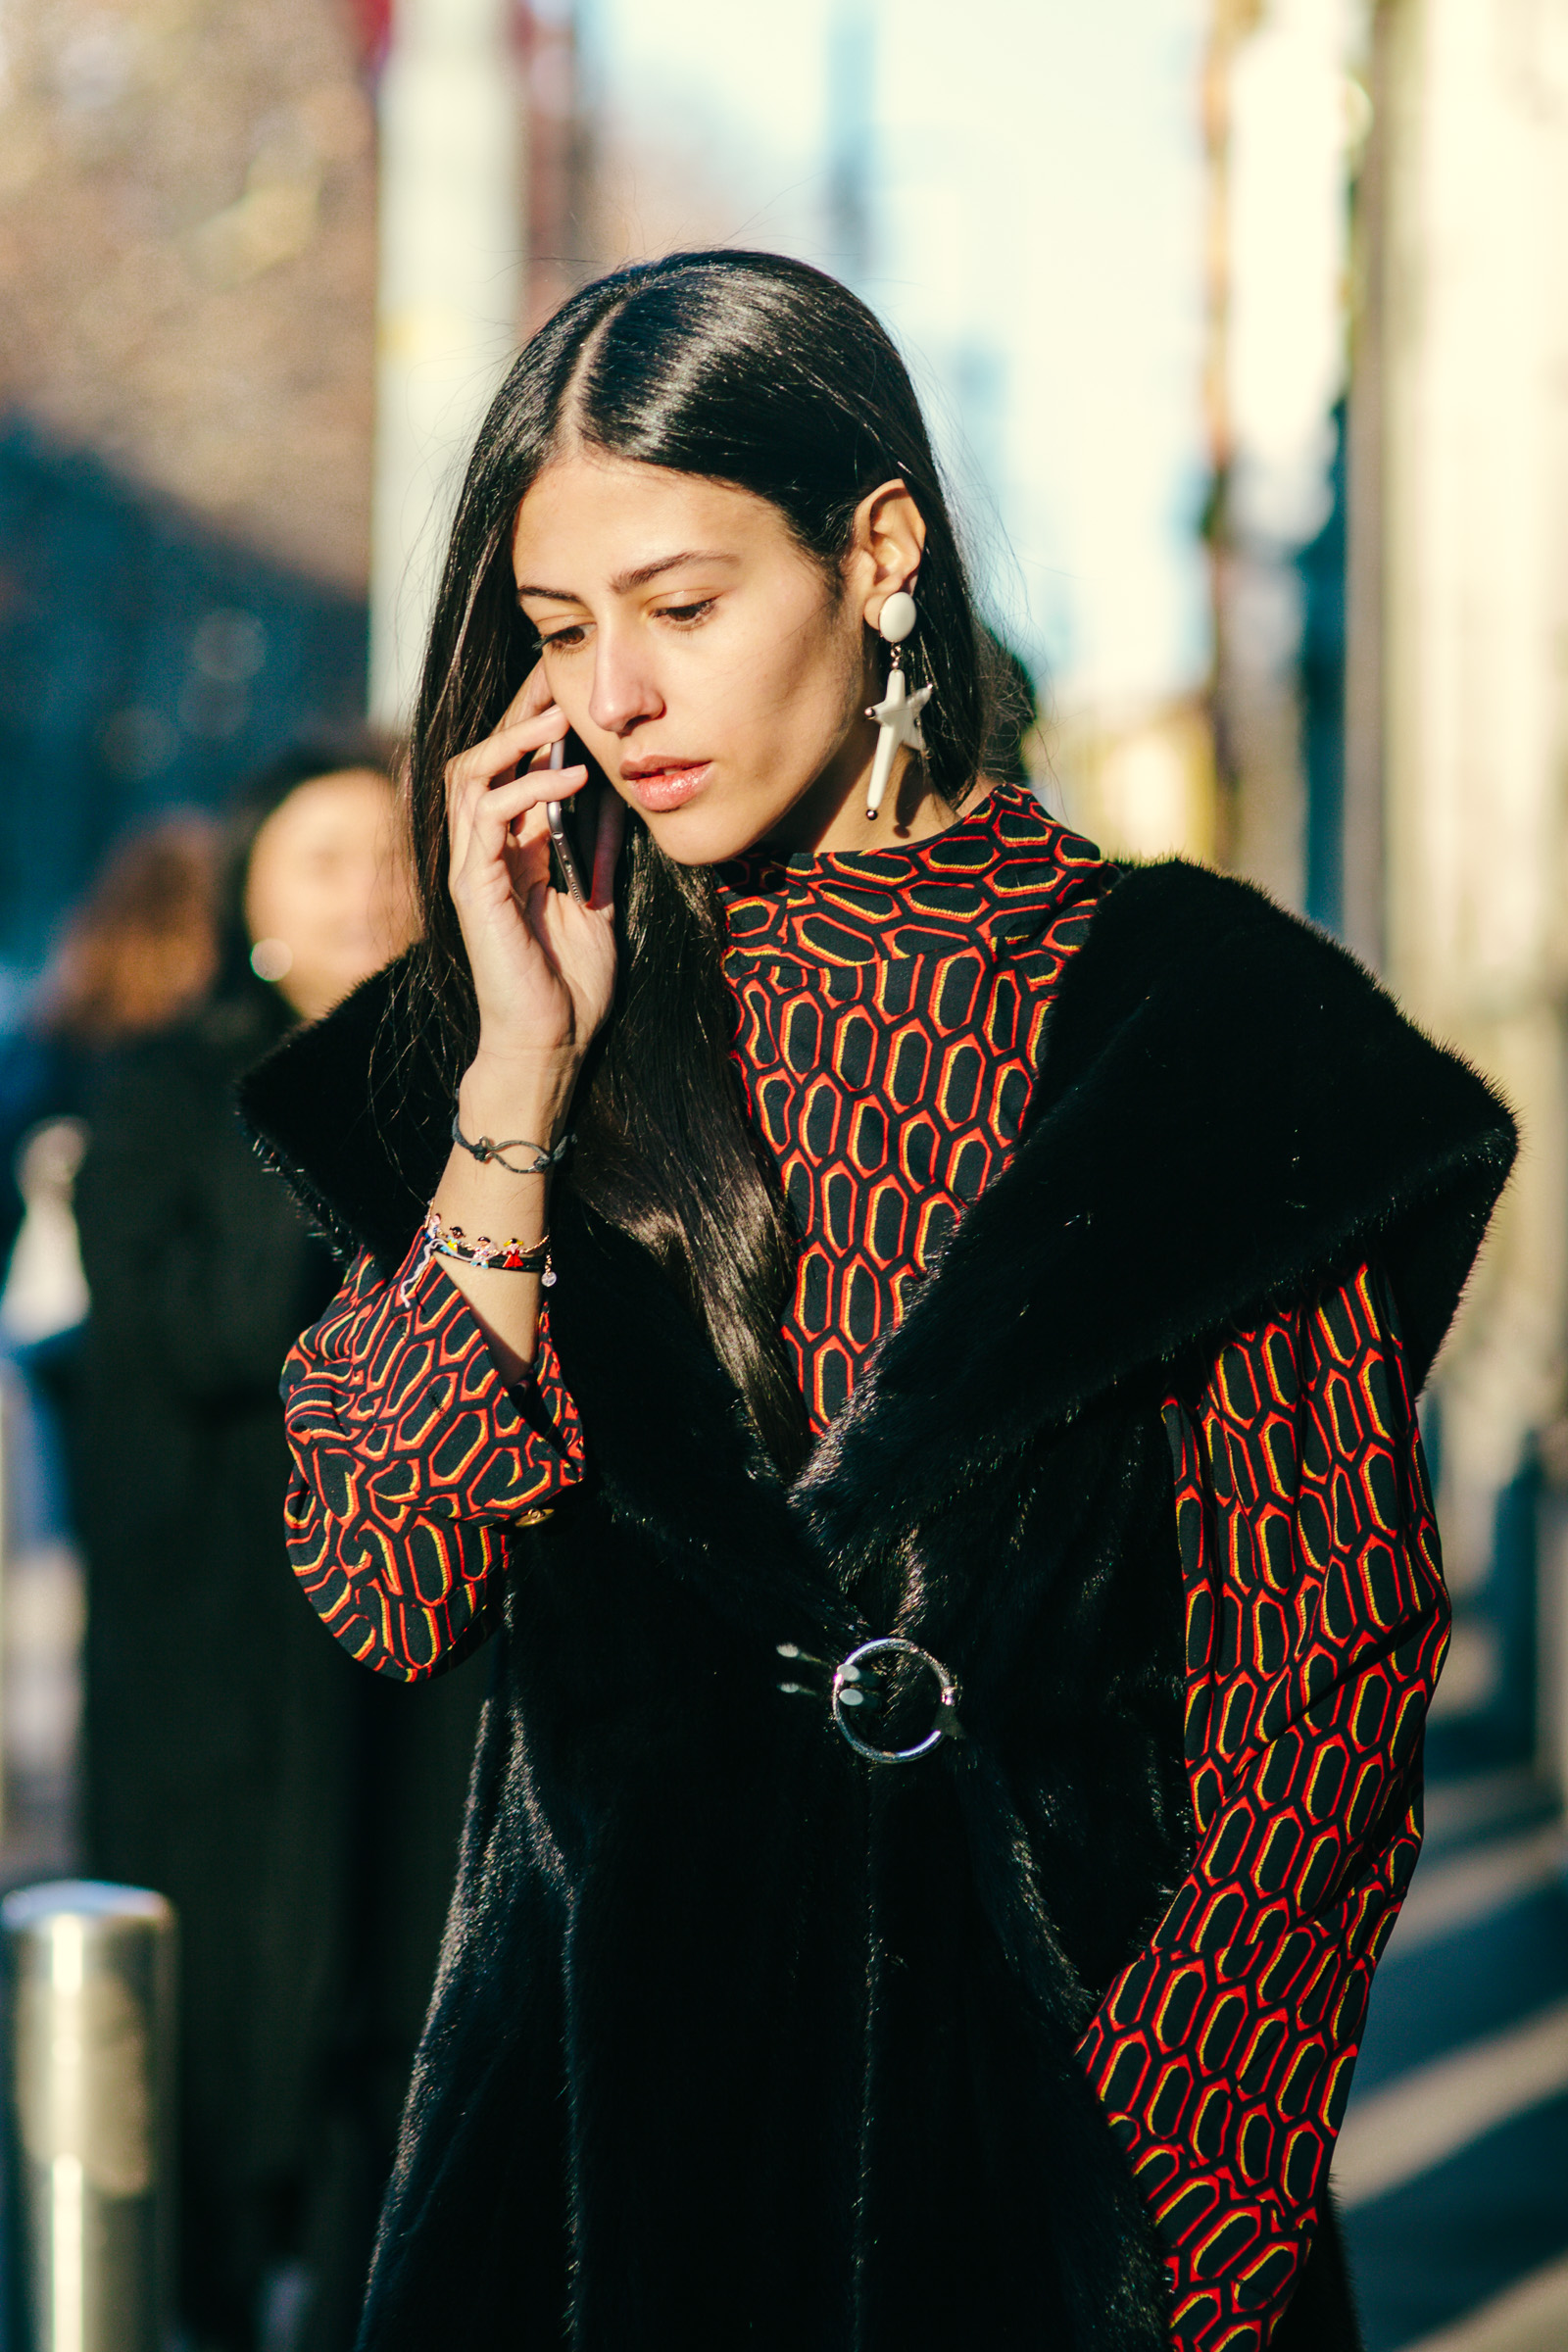 Gilda Ambrosio wearing a printed blouse and fur dress after the Marni Men's Fahsion show in Milan, Italy